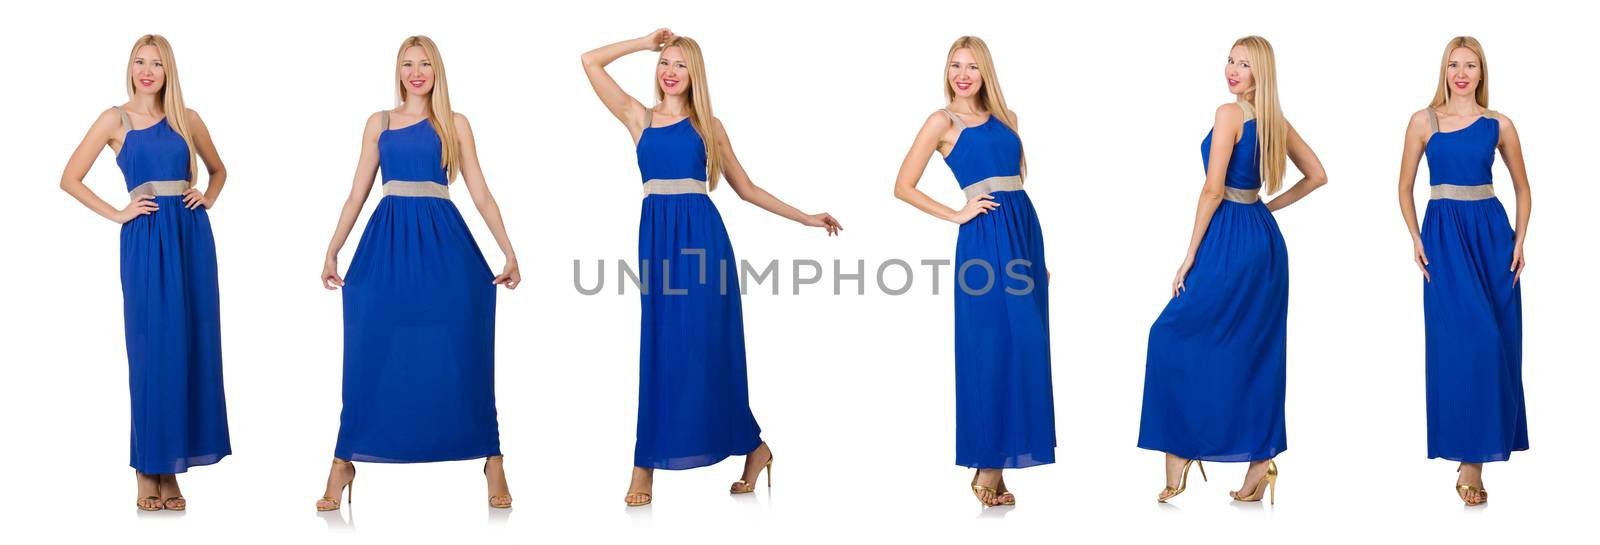 Beautiful woman in long blue dress isolated on white by Elnur